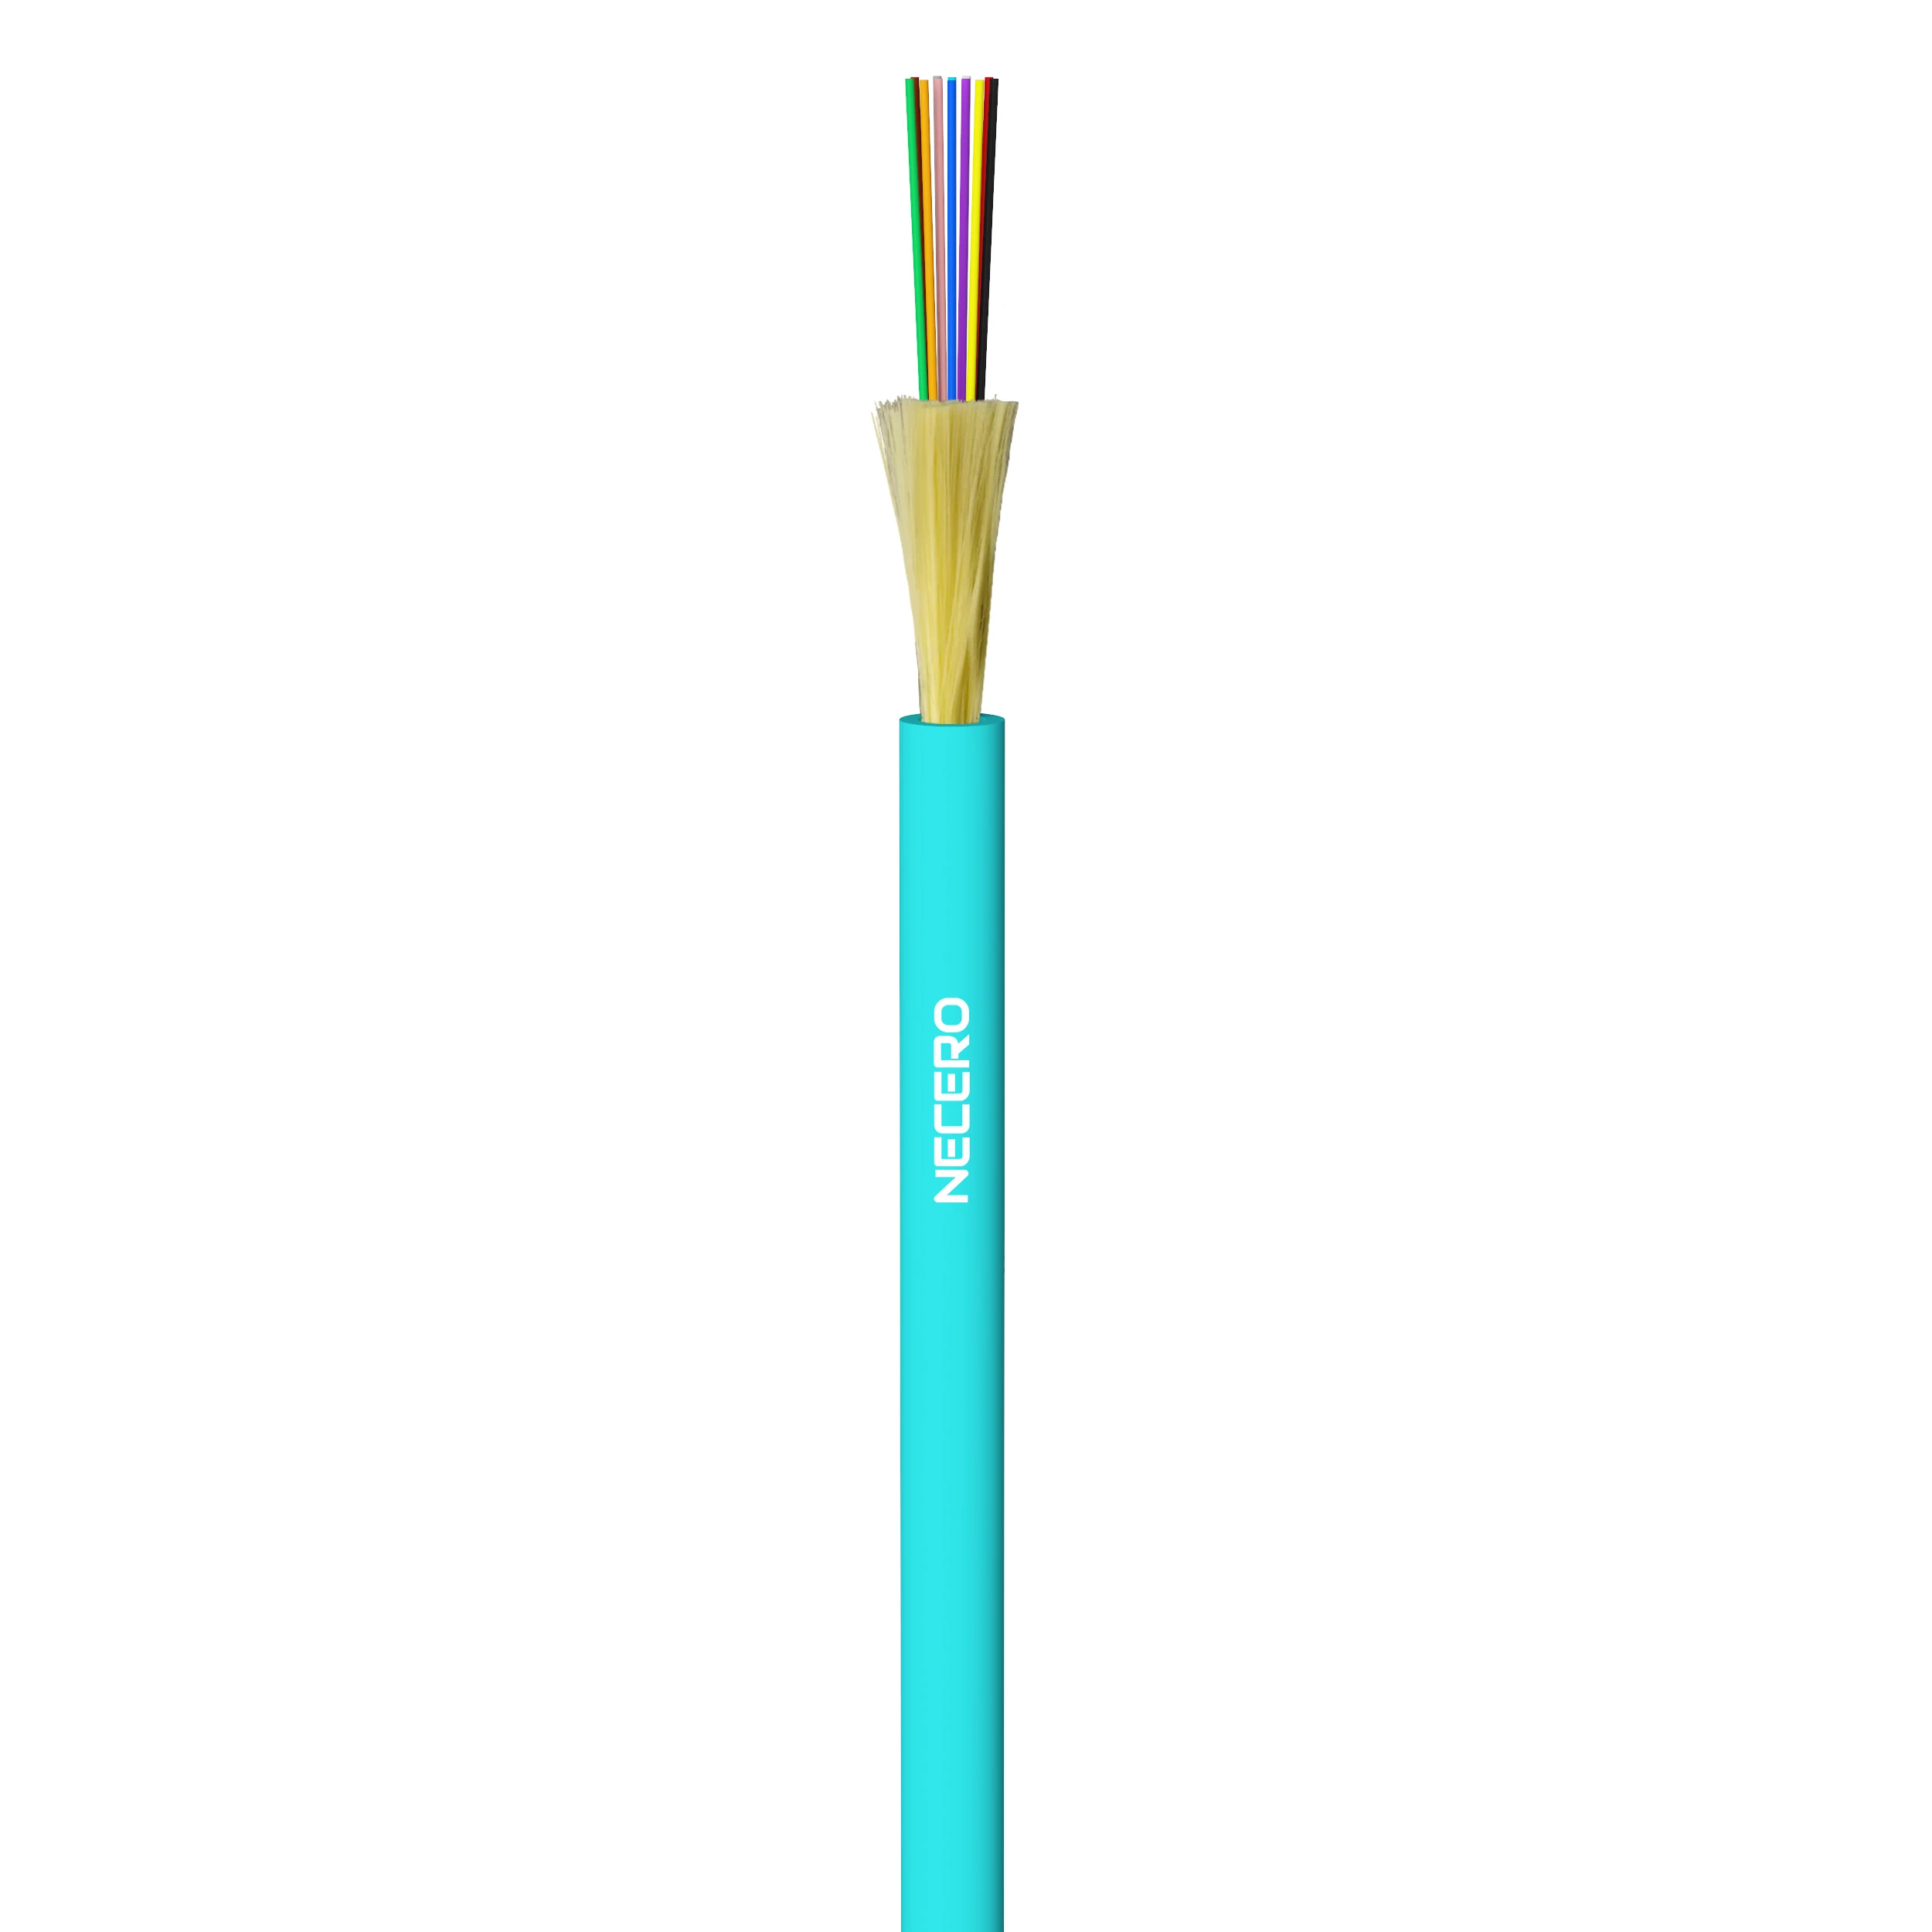 20 years fibra optica cable manufacturer supply shenzhen data cable